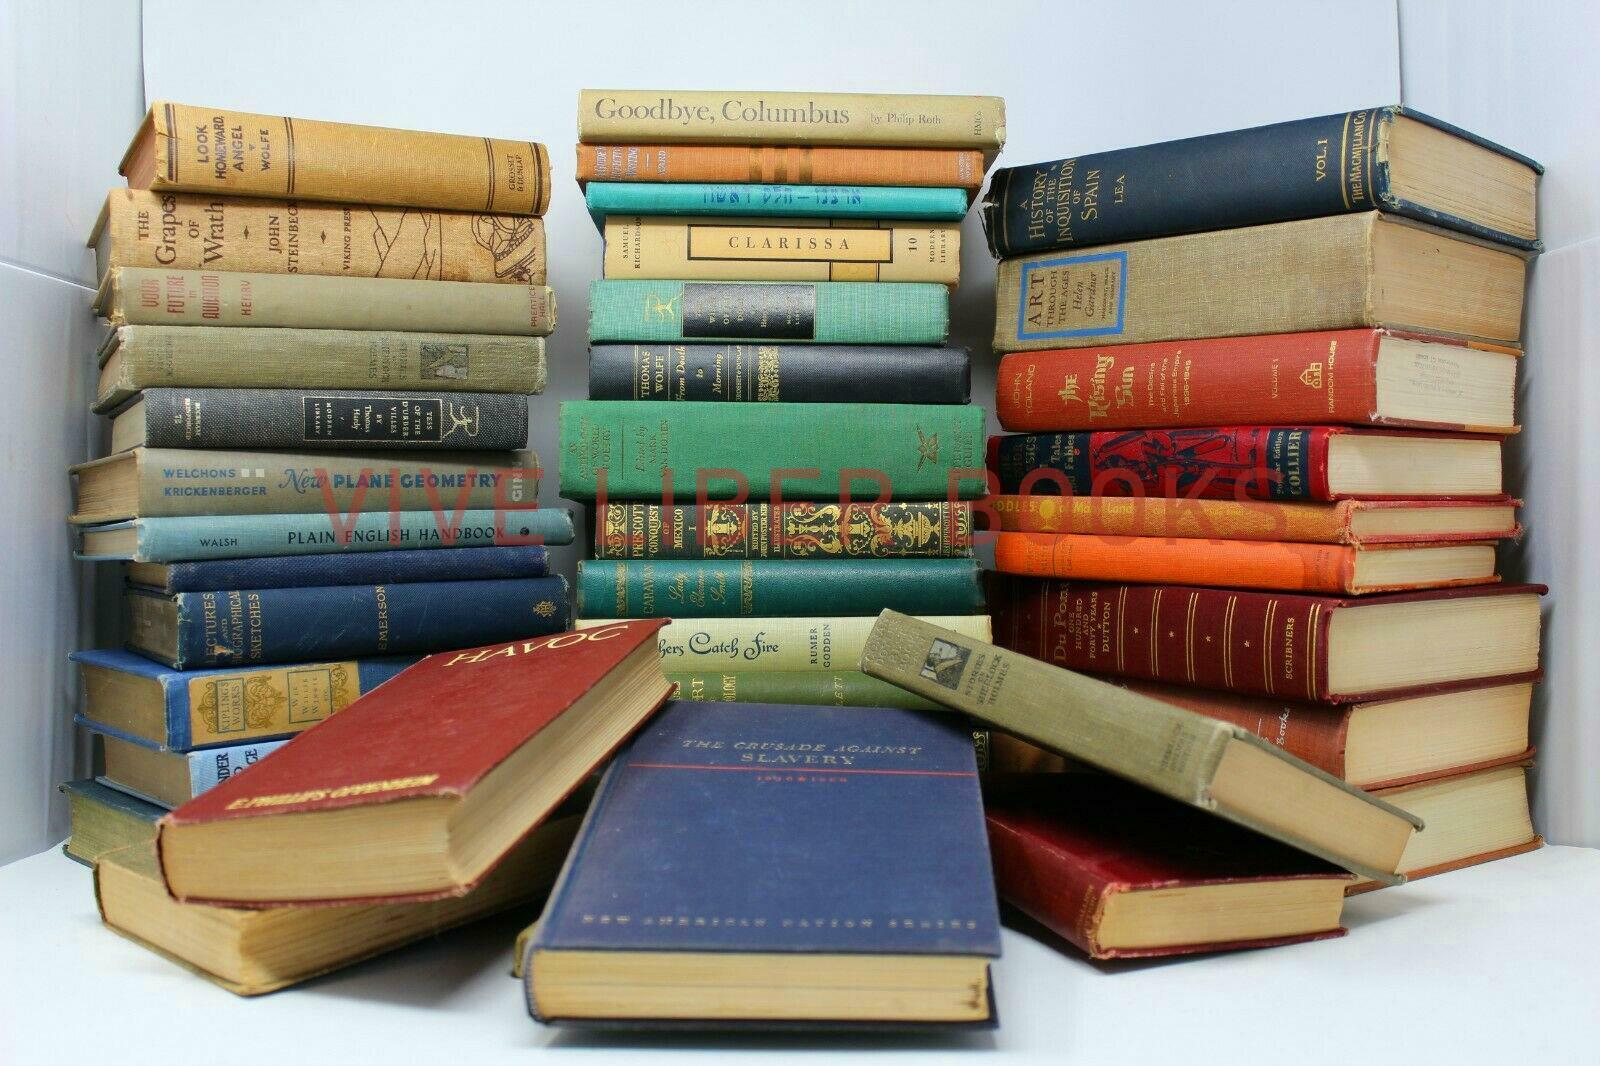 Lot of 100 Vintage Old Rare Antique Hardcover Books - Mixed Color - Random